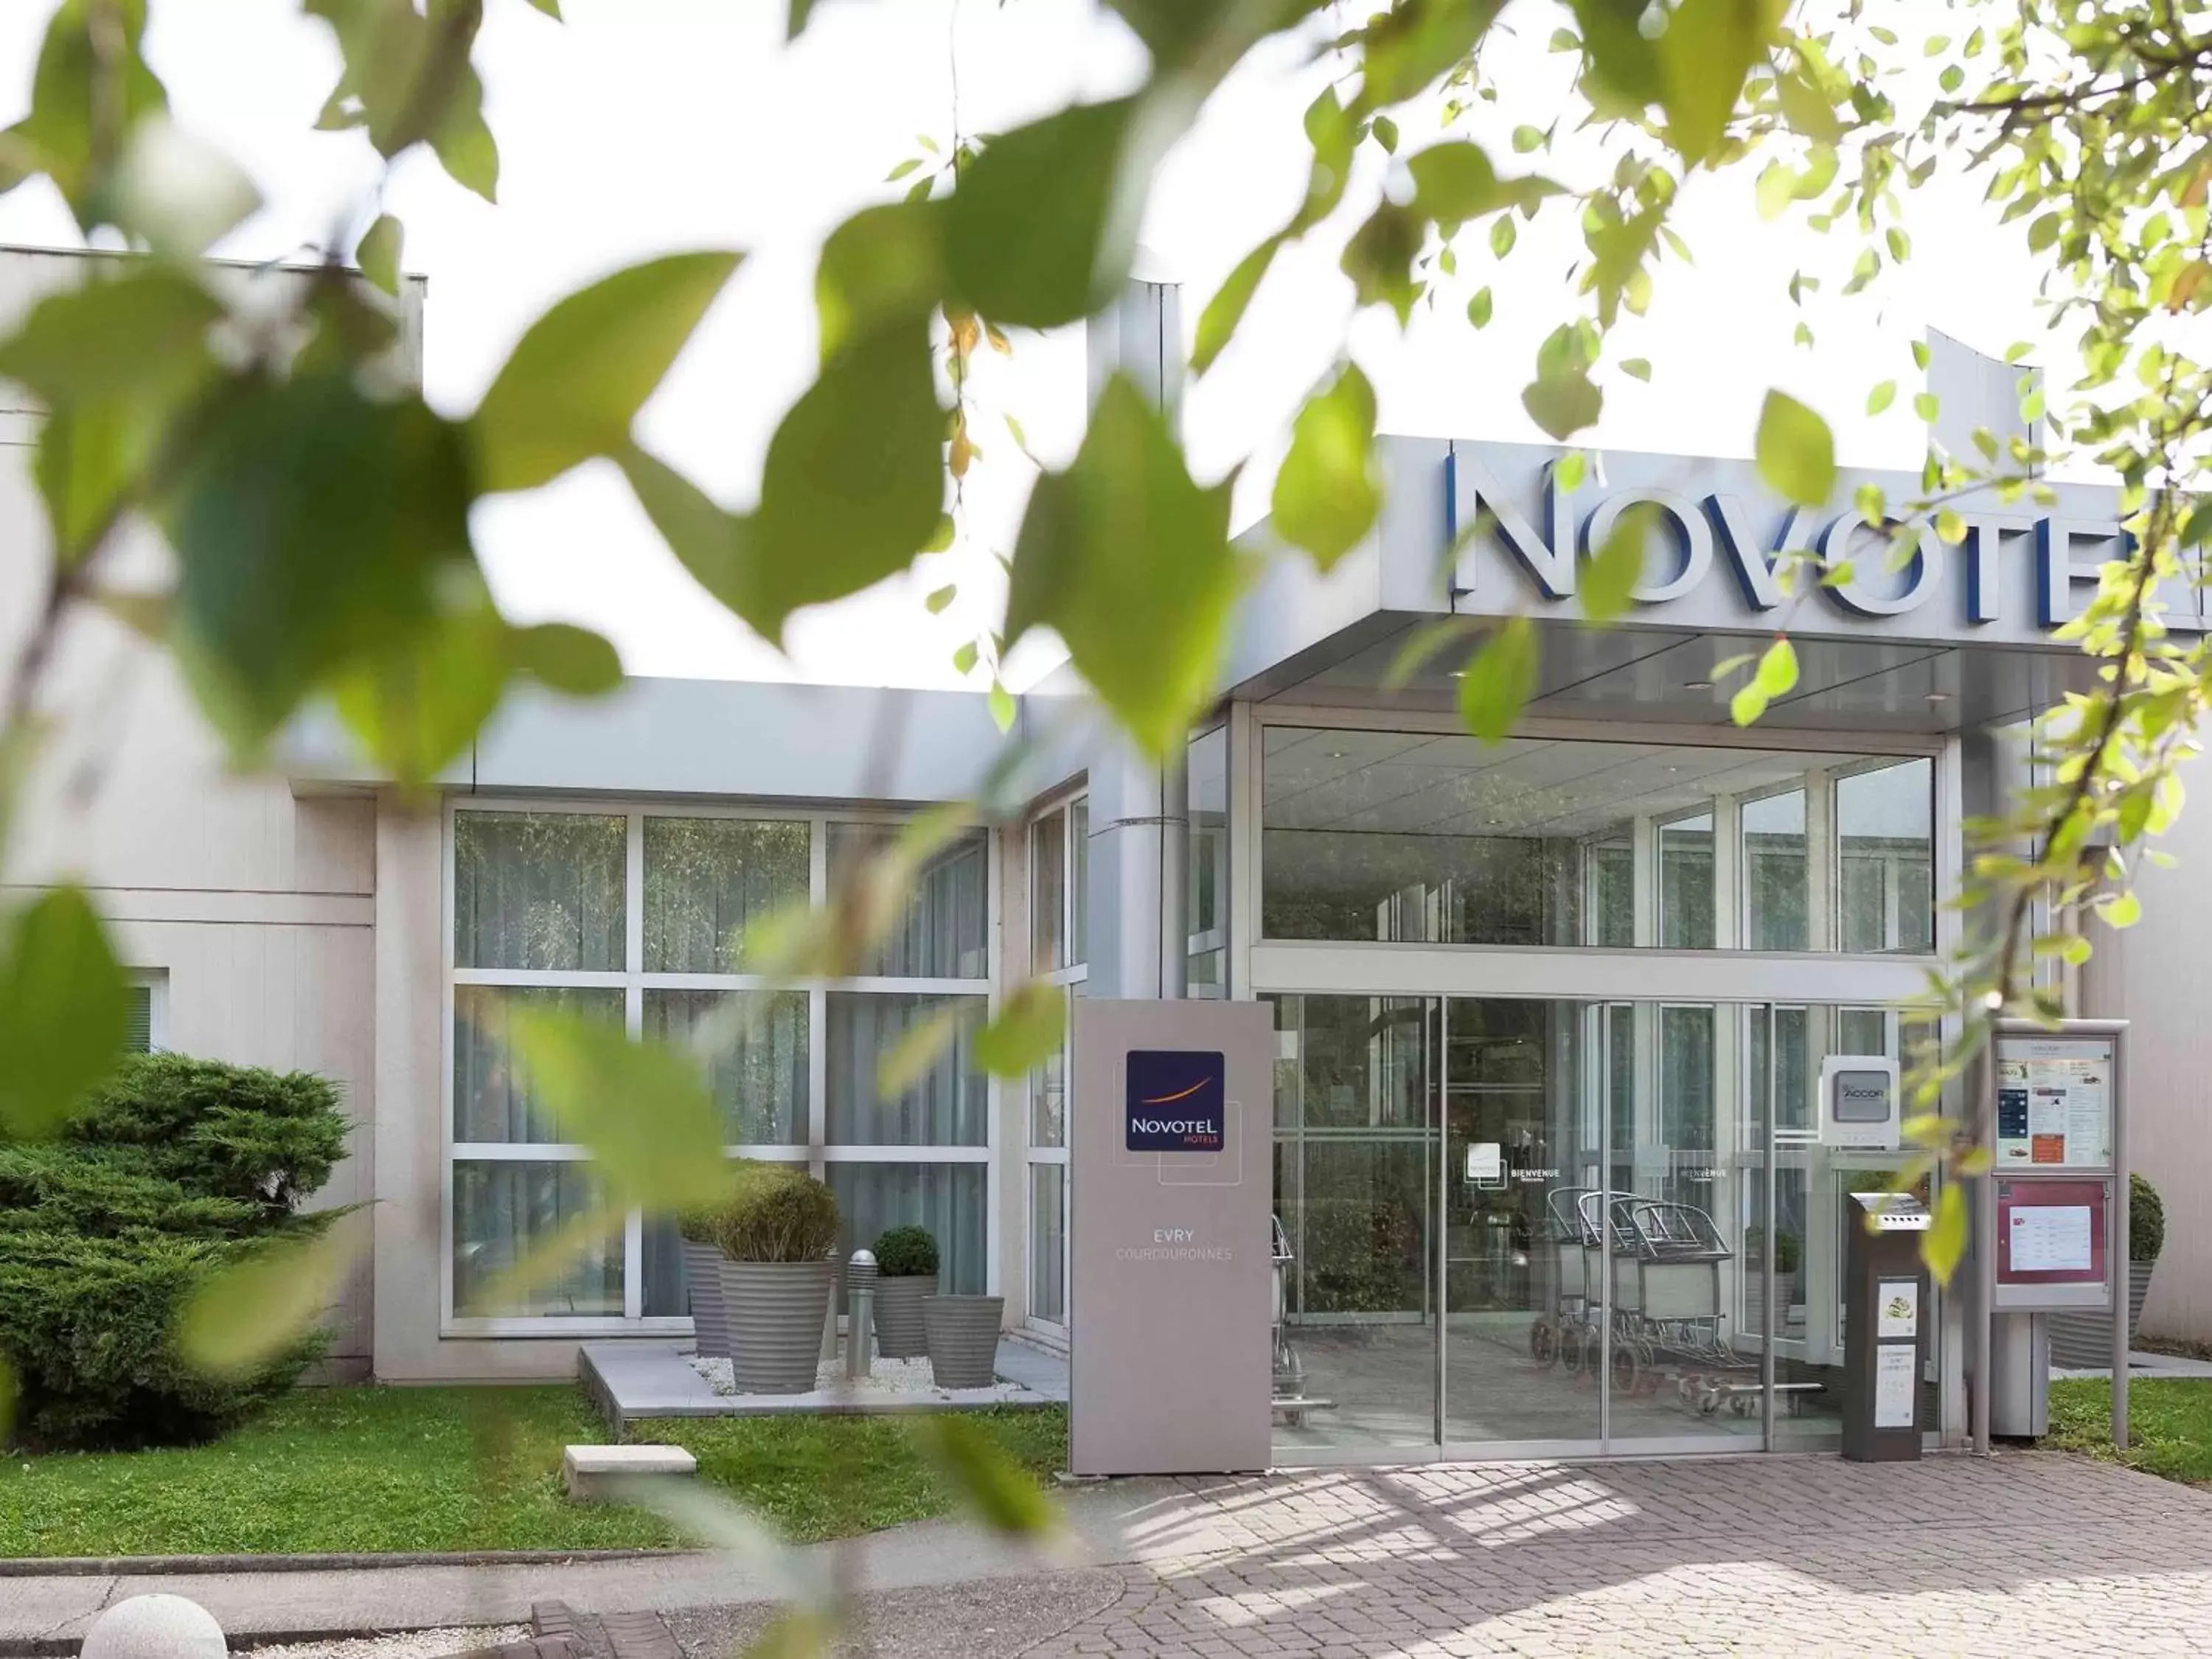 Property building in Novotel Evry Courcouronnes